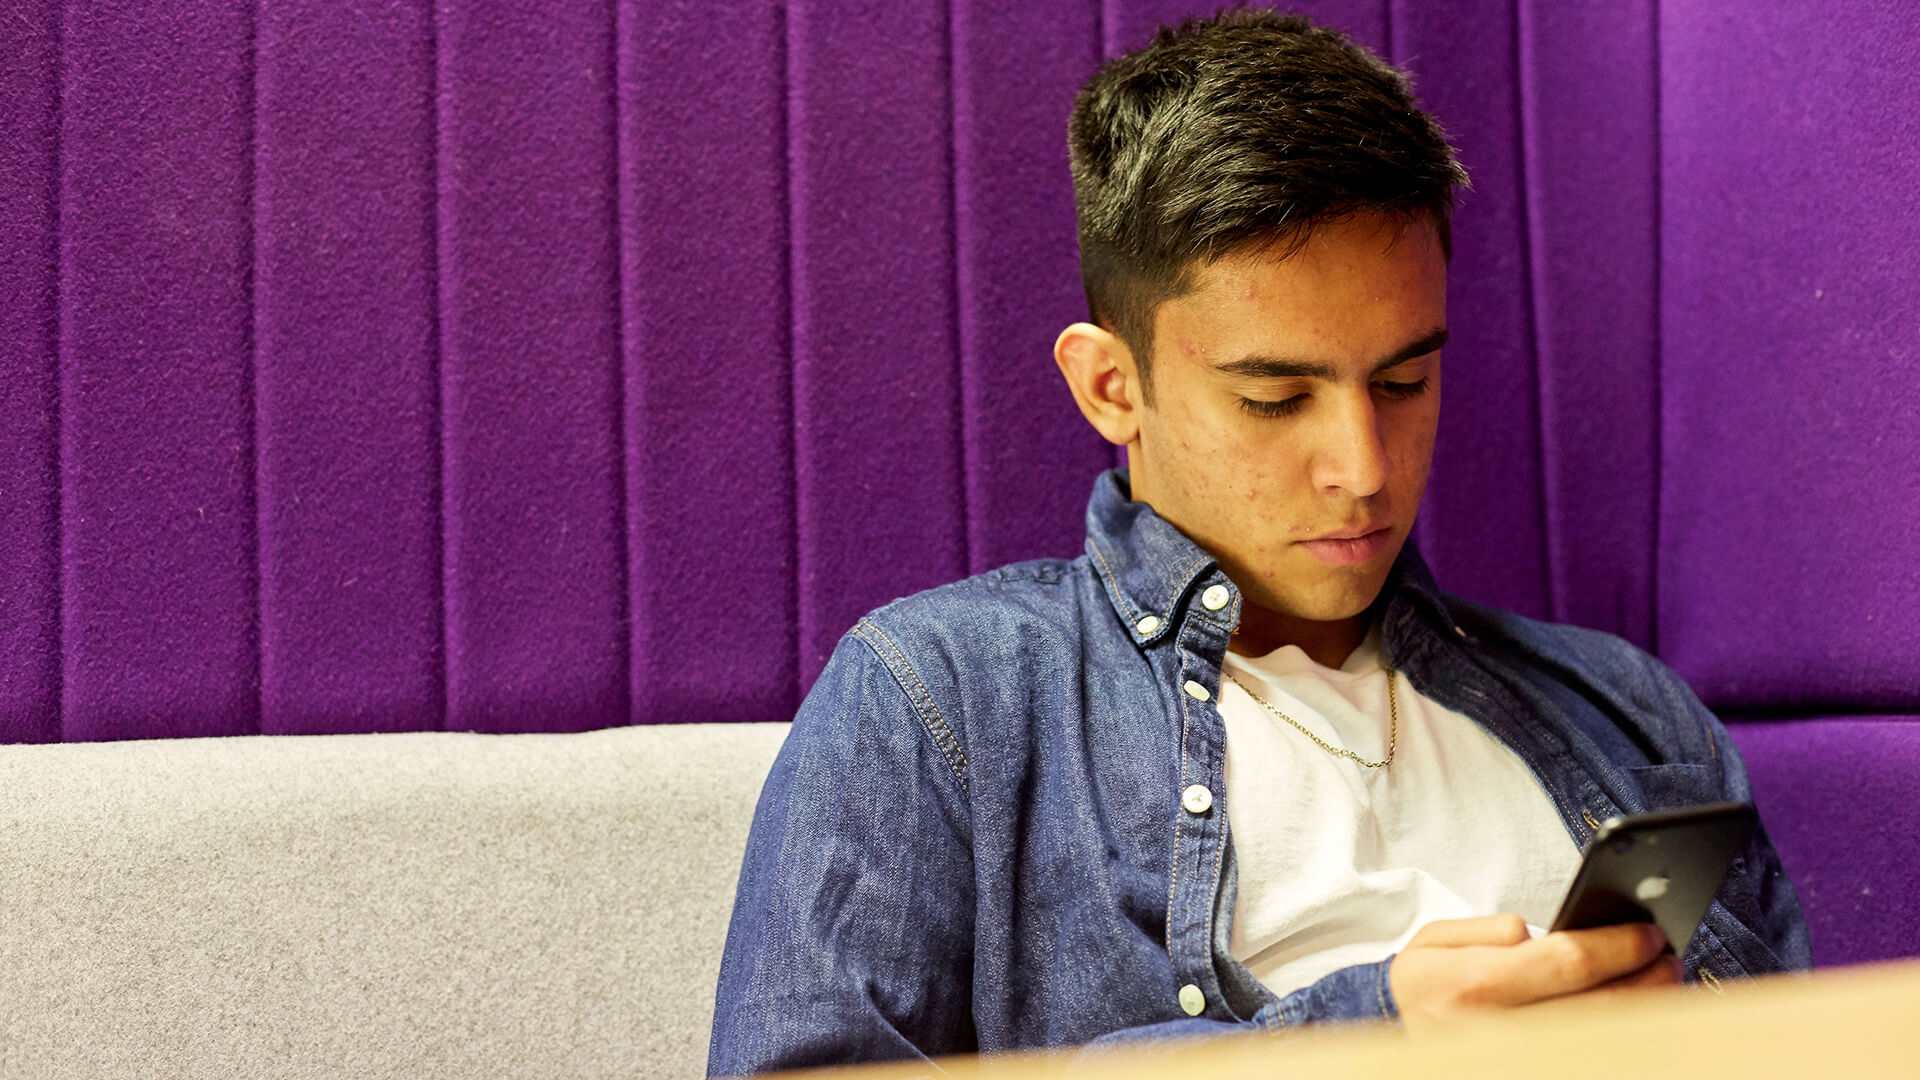 A boy in a blue denim shirt looks at his phone while sitting down against a grey sofa with a purple wall.